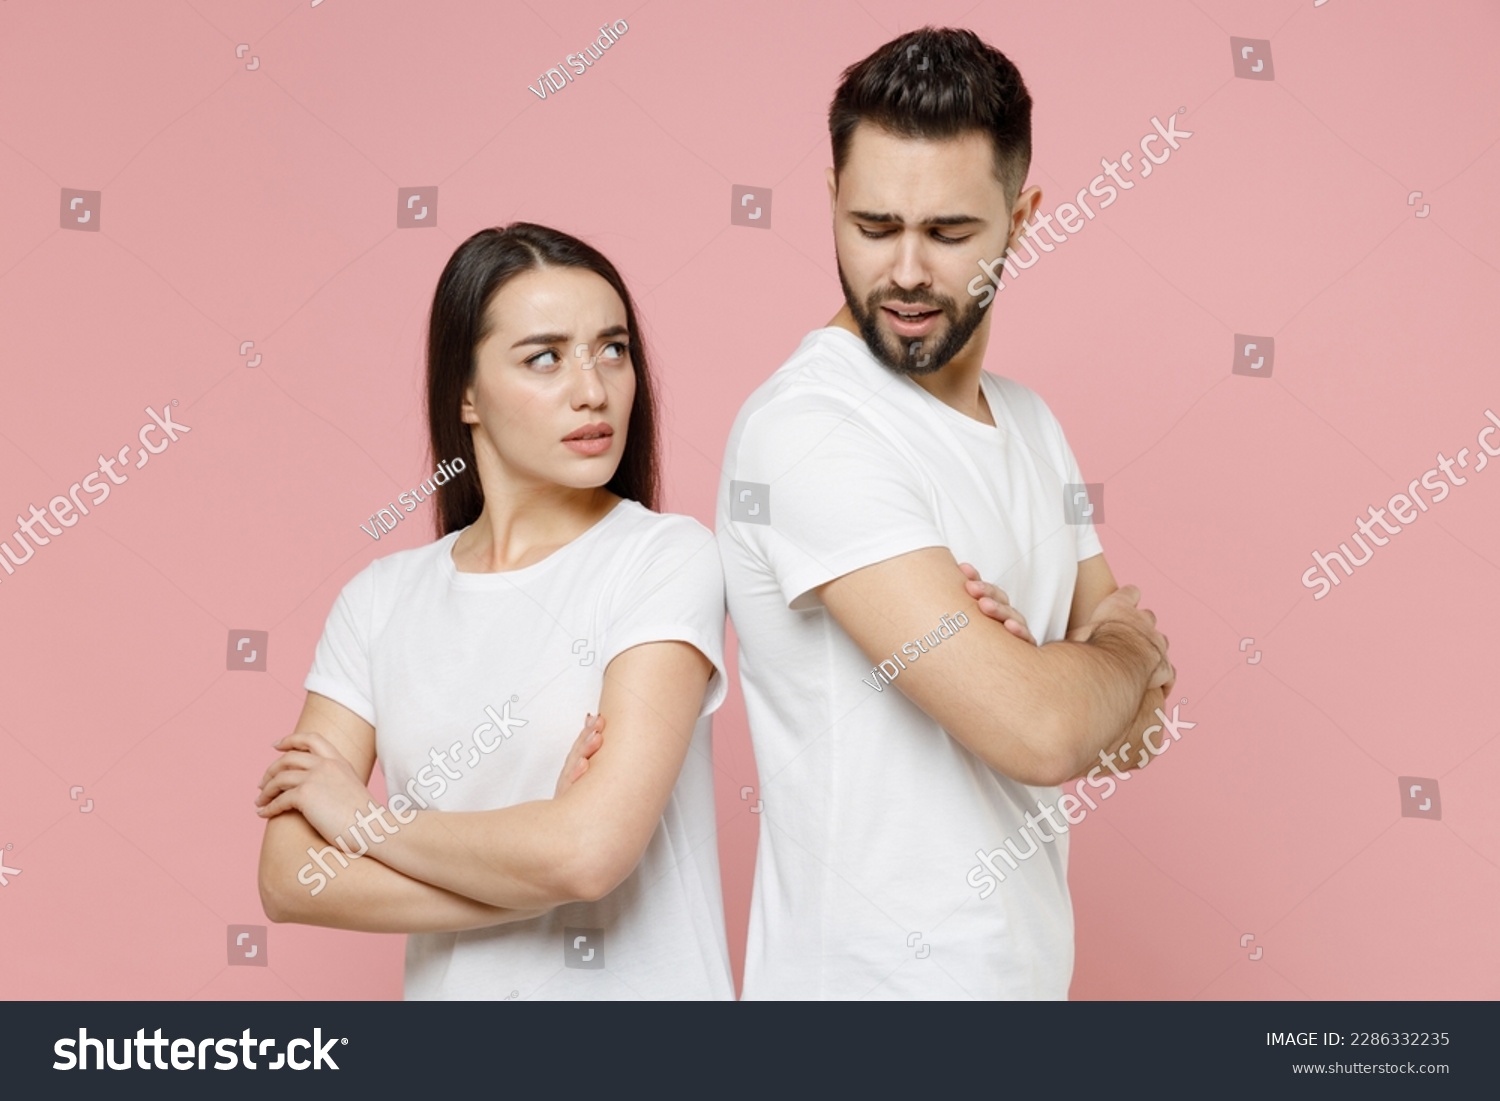 Young irritated dissatisfied couple two friends man woman in white basic t-shirts quarrel swearing have problem stress need family psychologist isolated on pastel pink color background studio portrait #2286332235